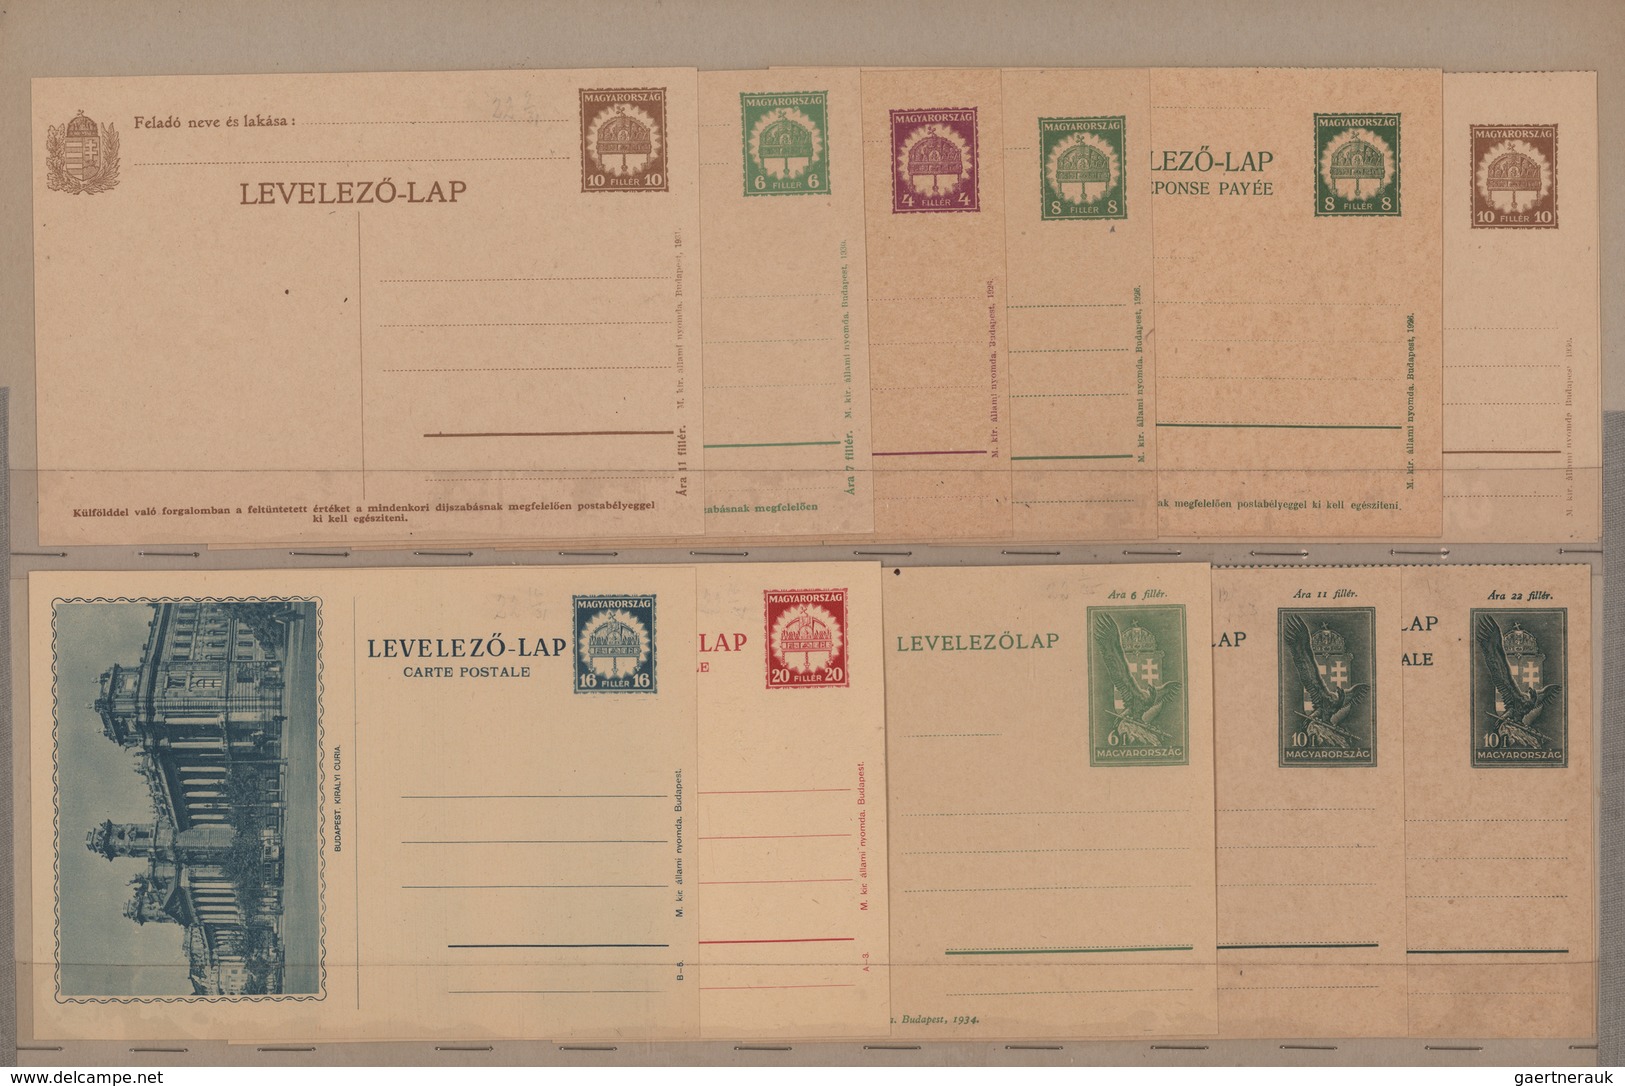 Ungarn - Ganzsachen: 1876-1951: THE ENTIRE COLLECTION OF THE UPU SAMPLES OF HUNGARIAN POSTAL STATION - Enteros Postales